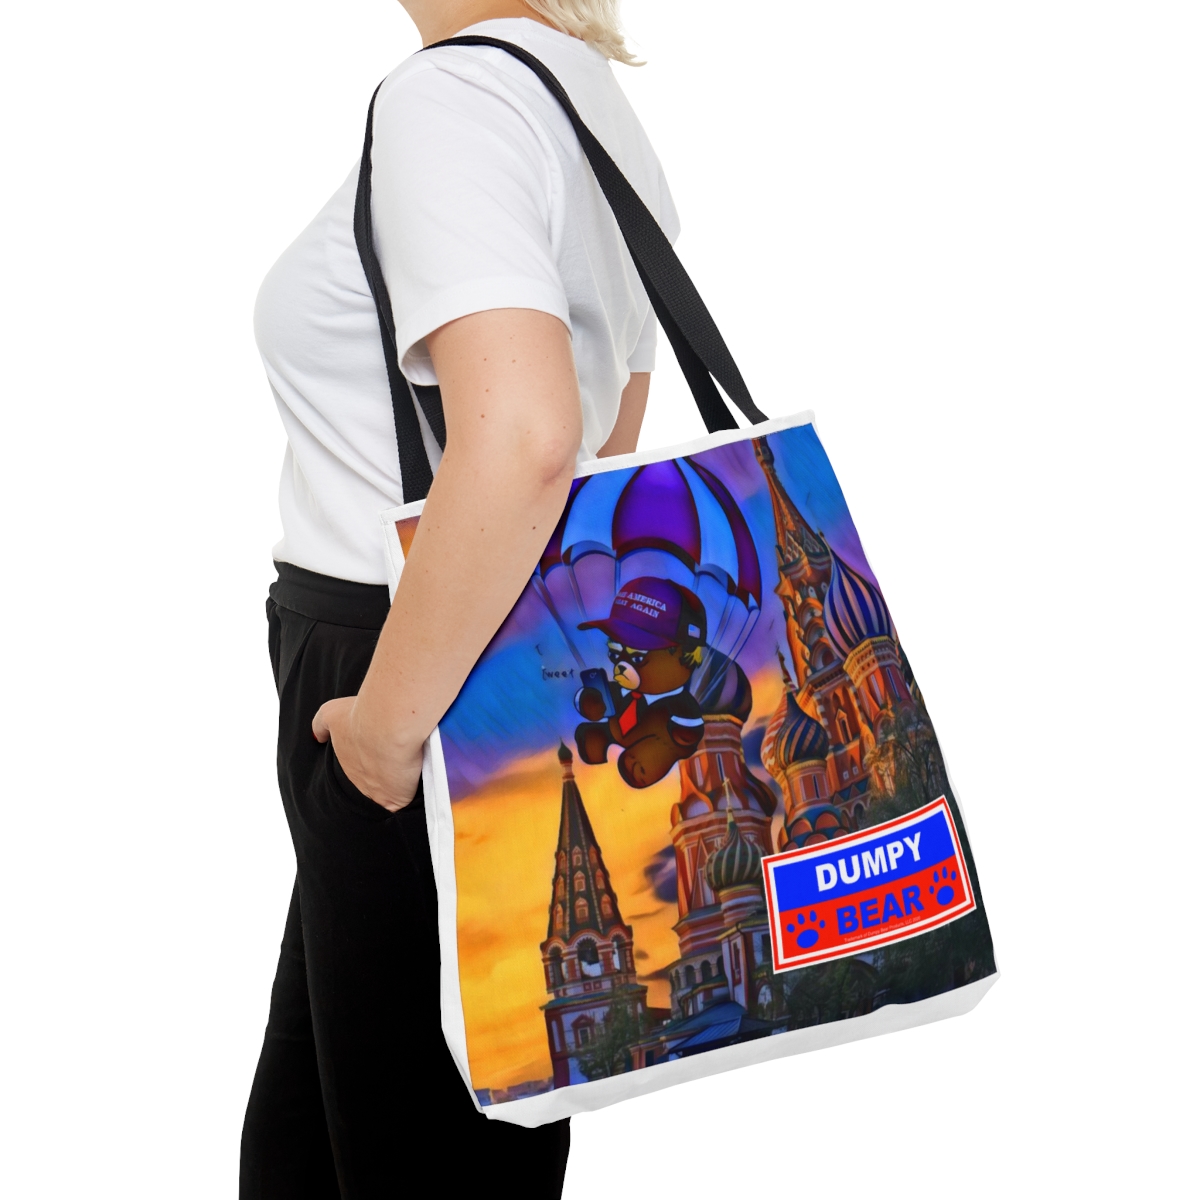 Dumpy Bear Goes to Russia - Tote Bag (AOP) product thumbnail image